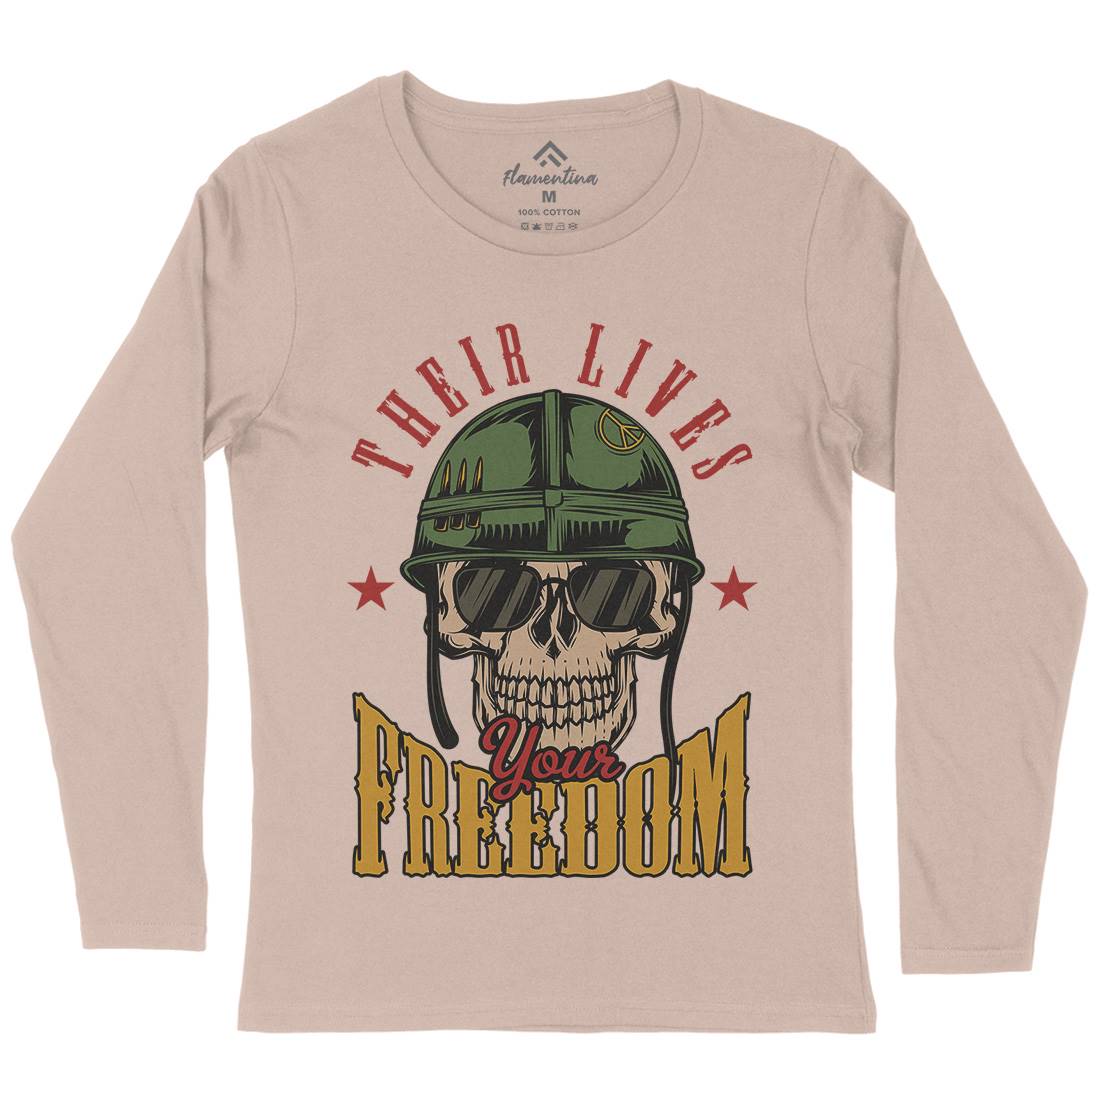 Your Freedom Womens Long Sleeve T-Shirt Army C899